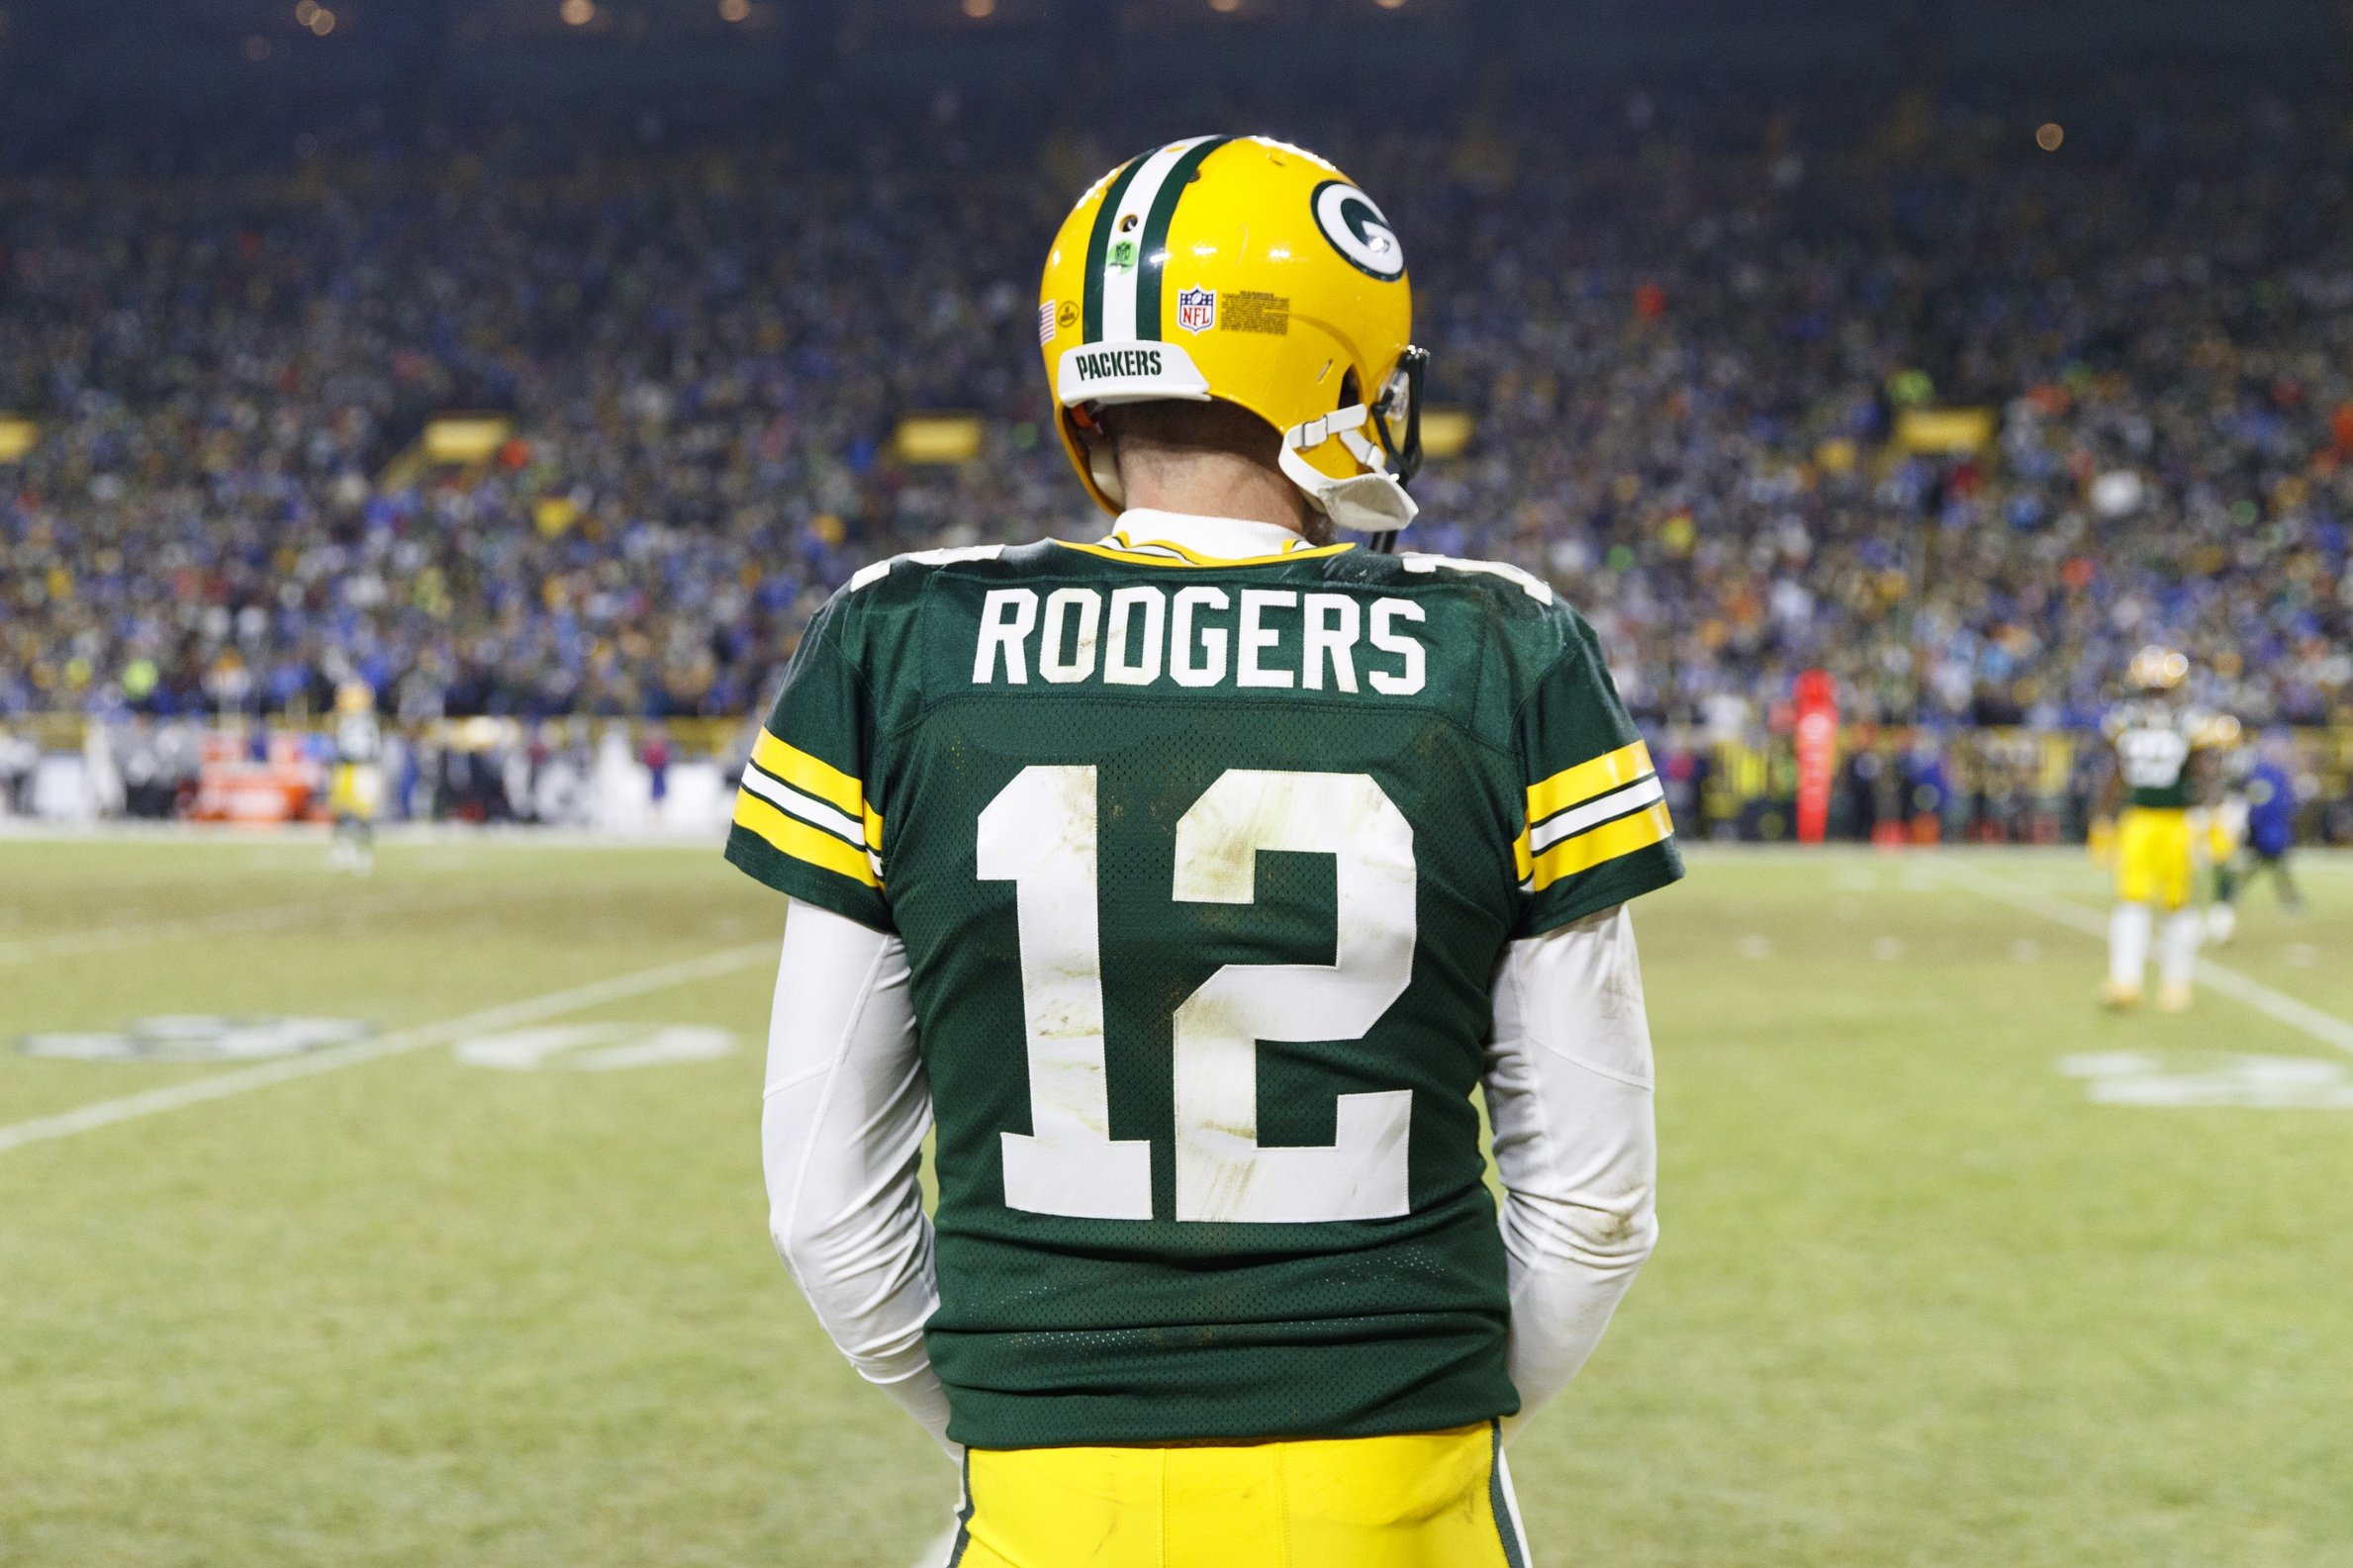 Bills hand Rodgers, Packers 4th straight loss, Sports